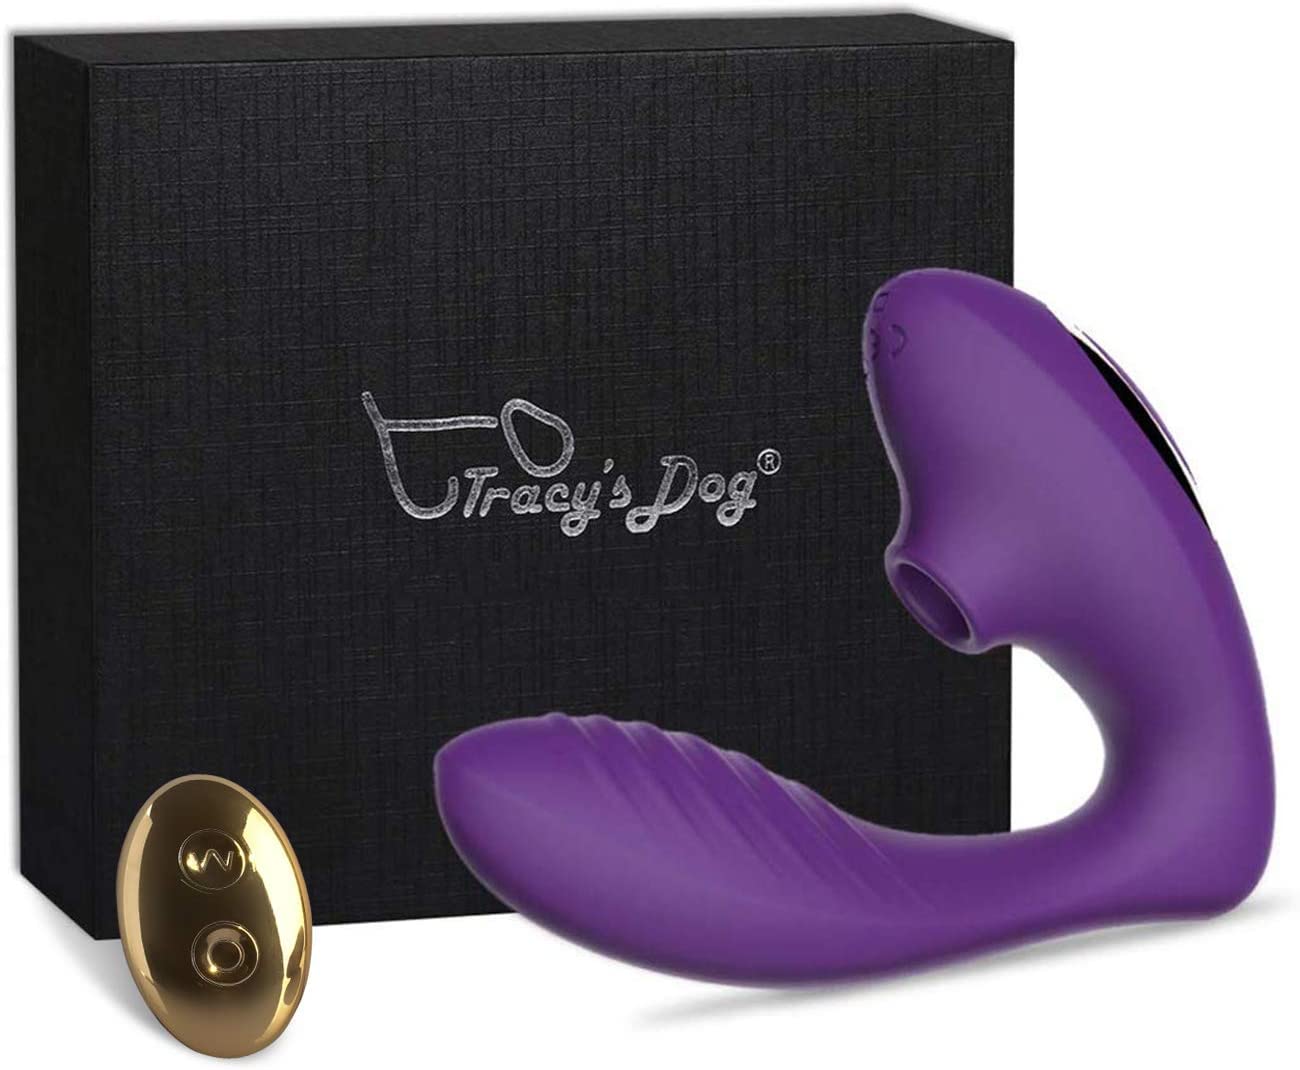 Image of Tracy's Dog OG Air 2 - Suction Vibrator with Remote